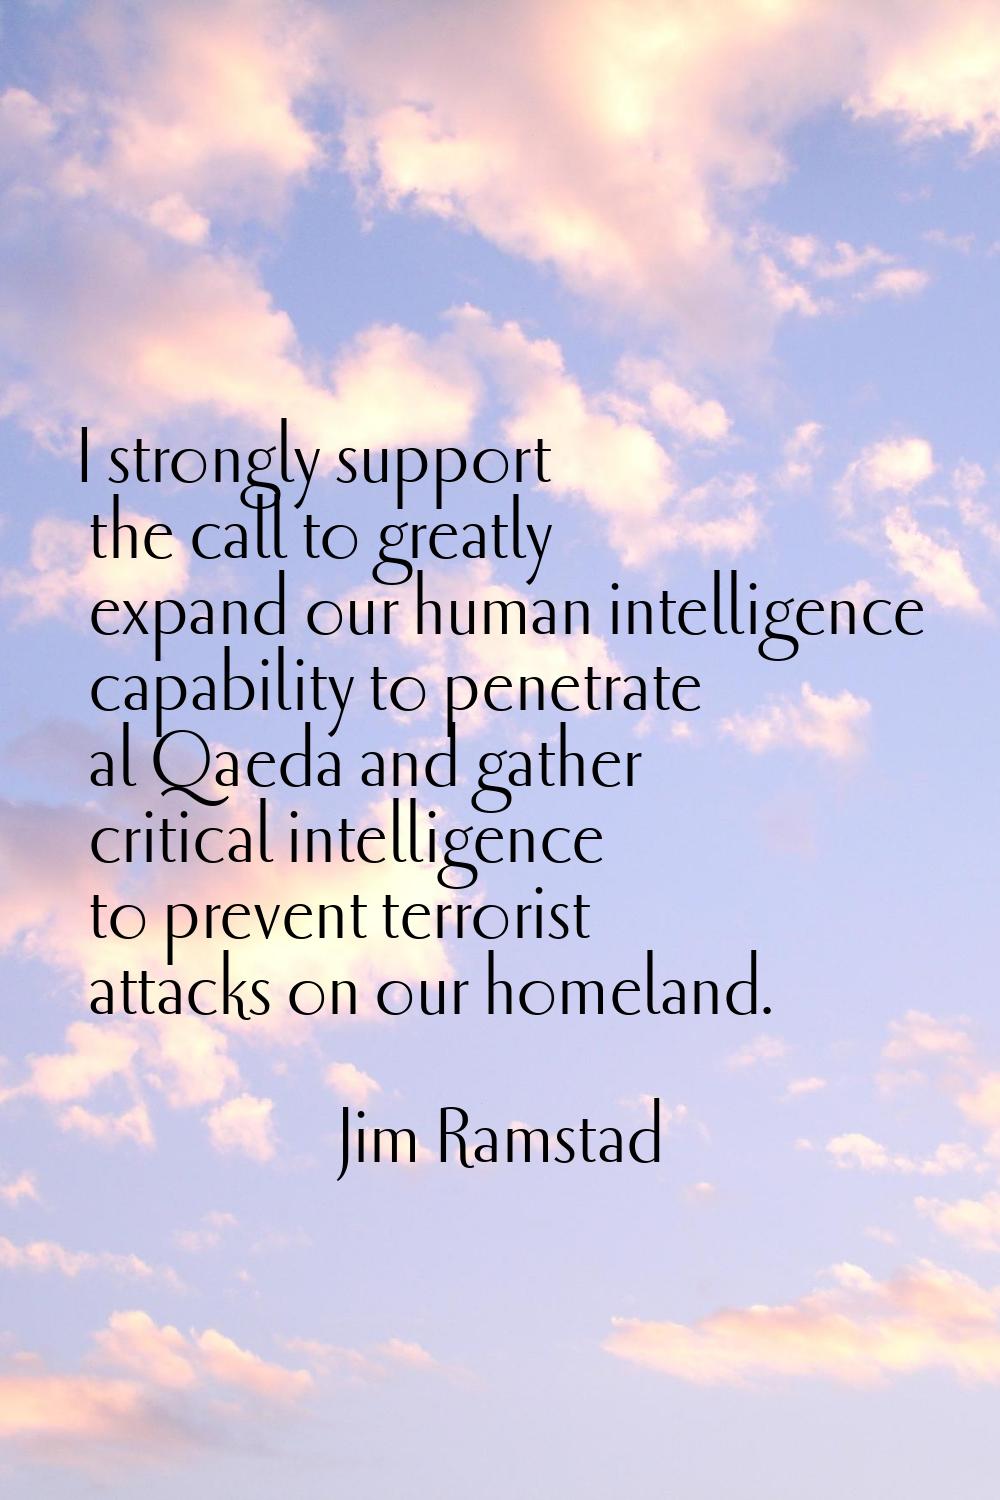 I strongly support the call to greatly expand our human intelligence capability to penetrate al Qae